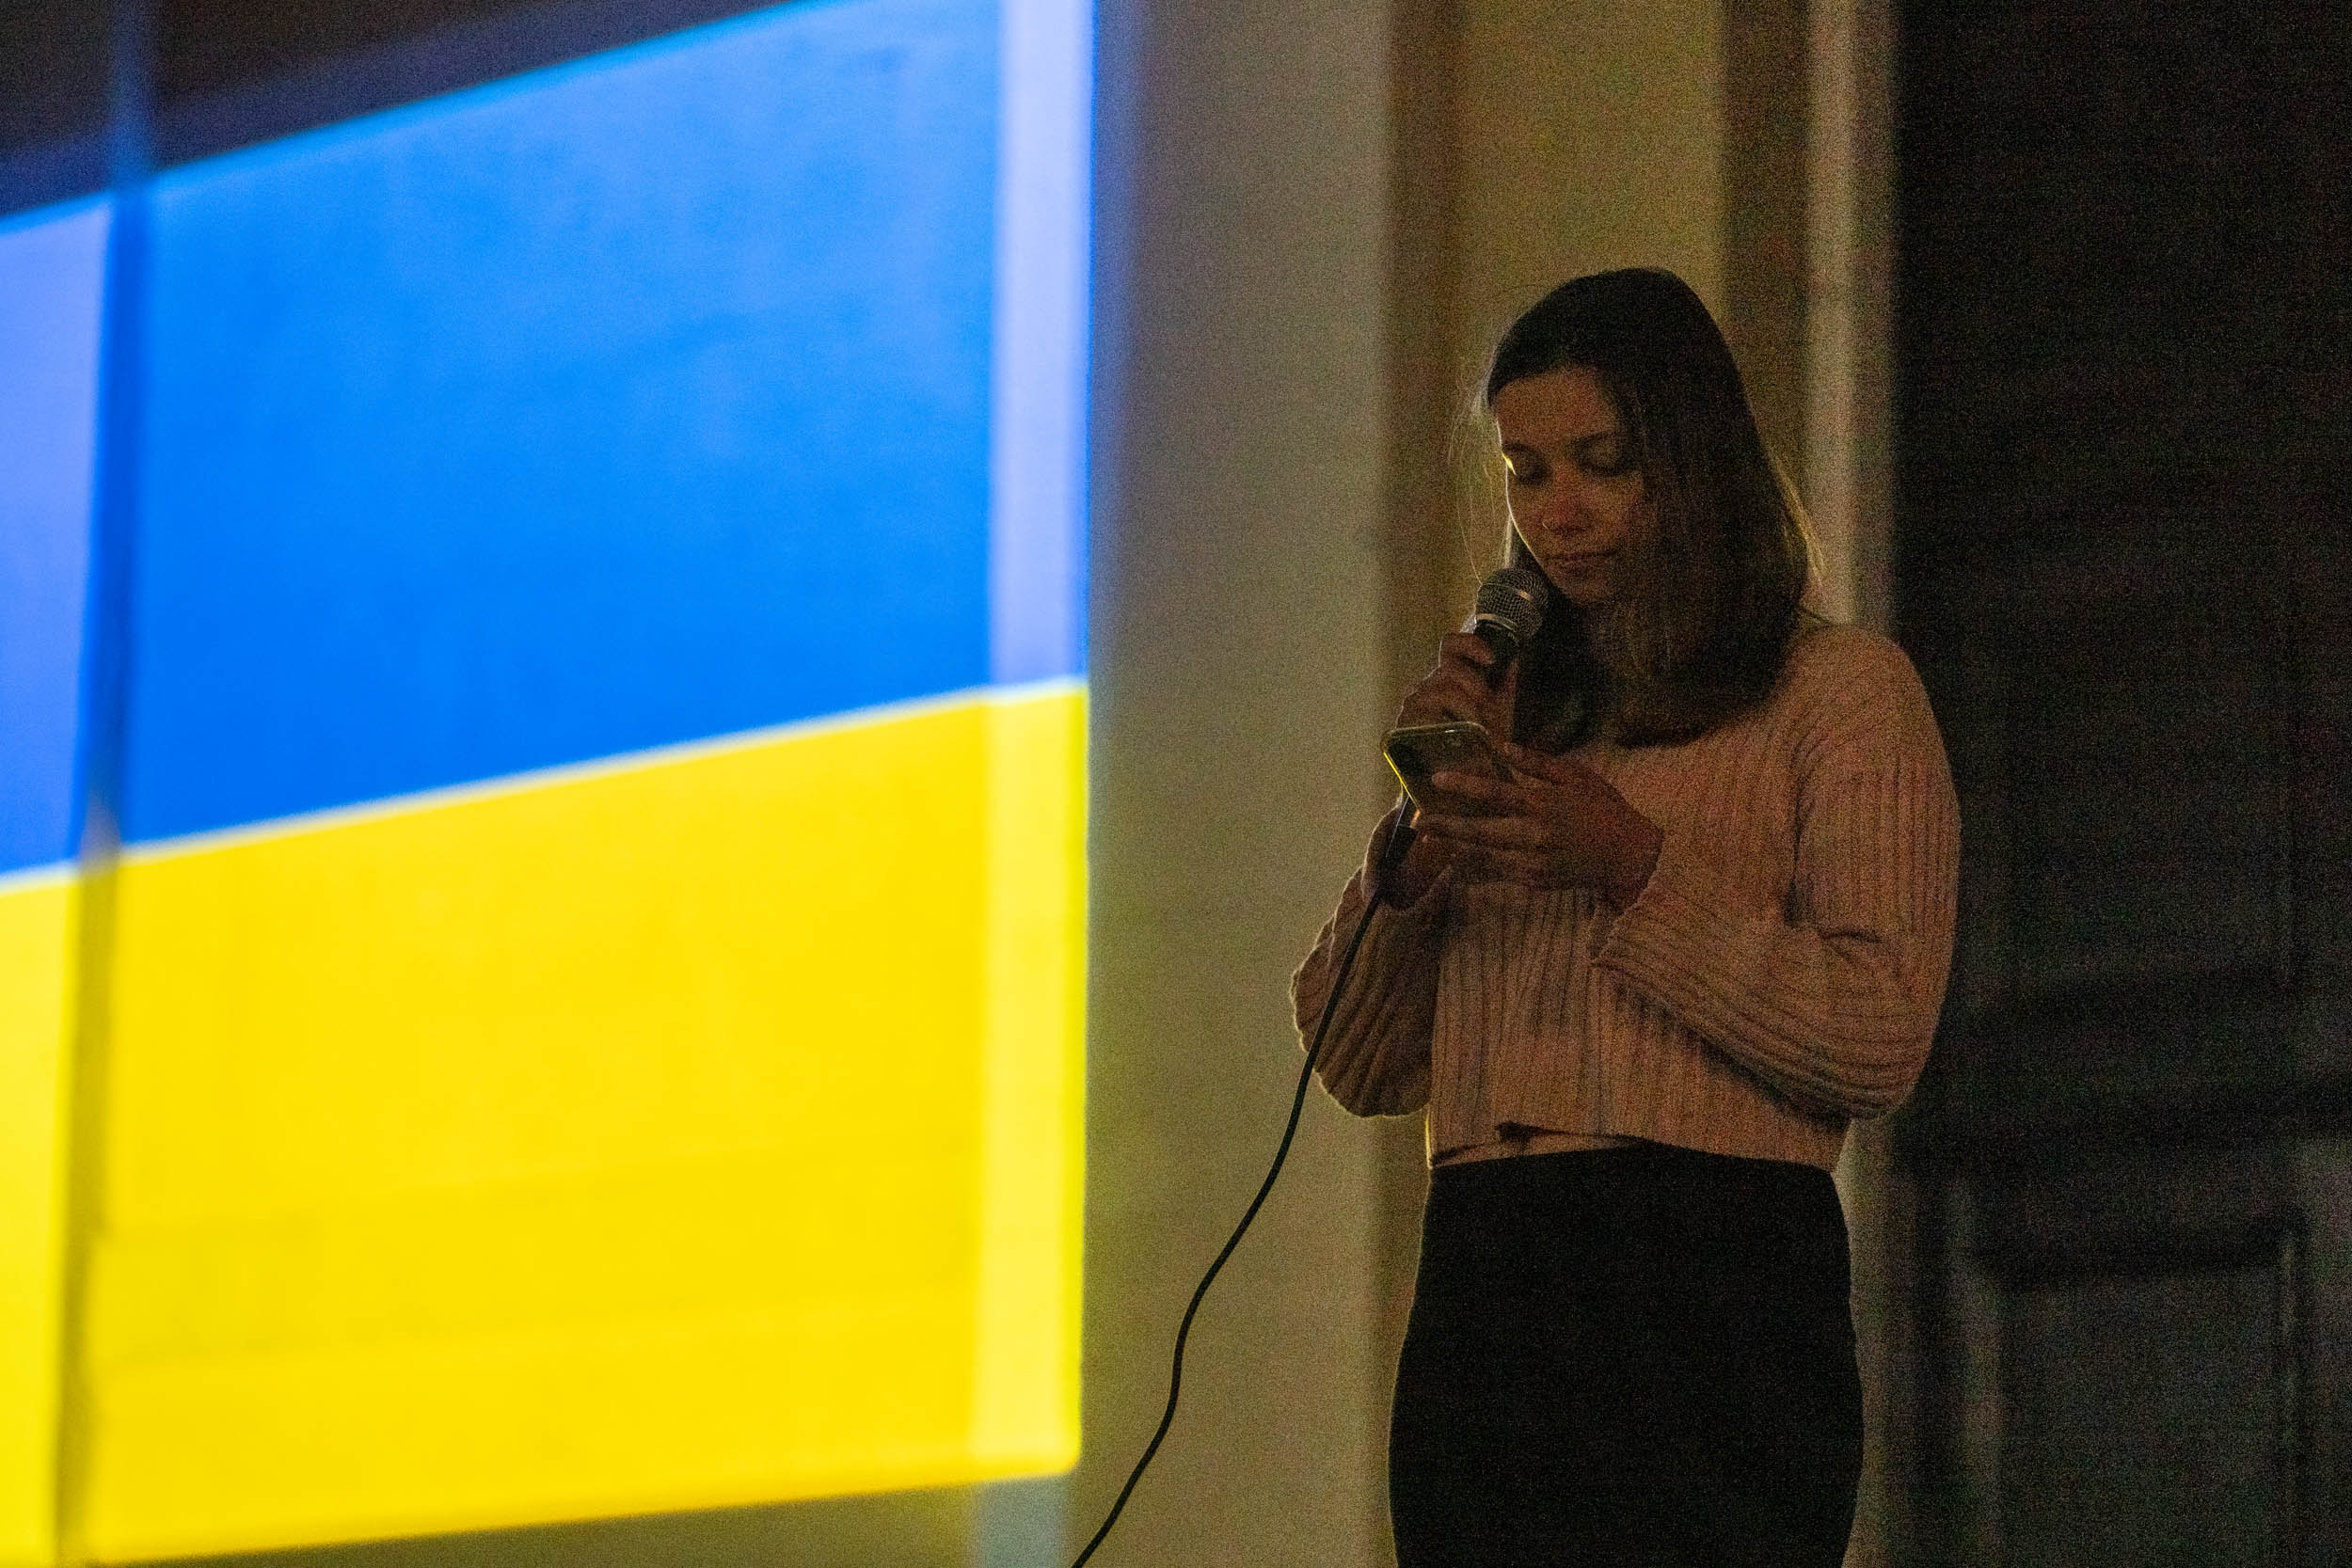 Woman standing with microphone with Ukraine flag next to her during the Ukraine vigil